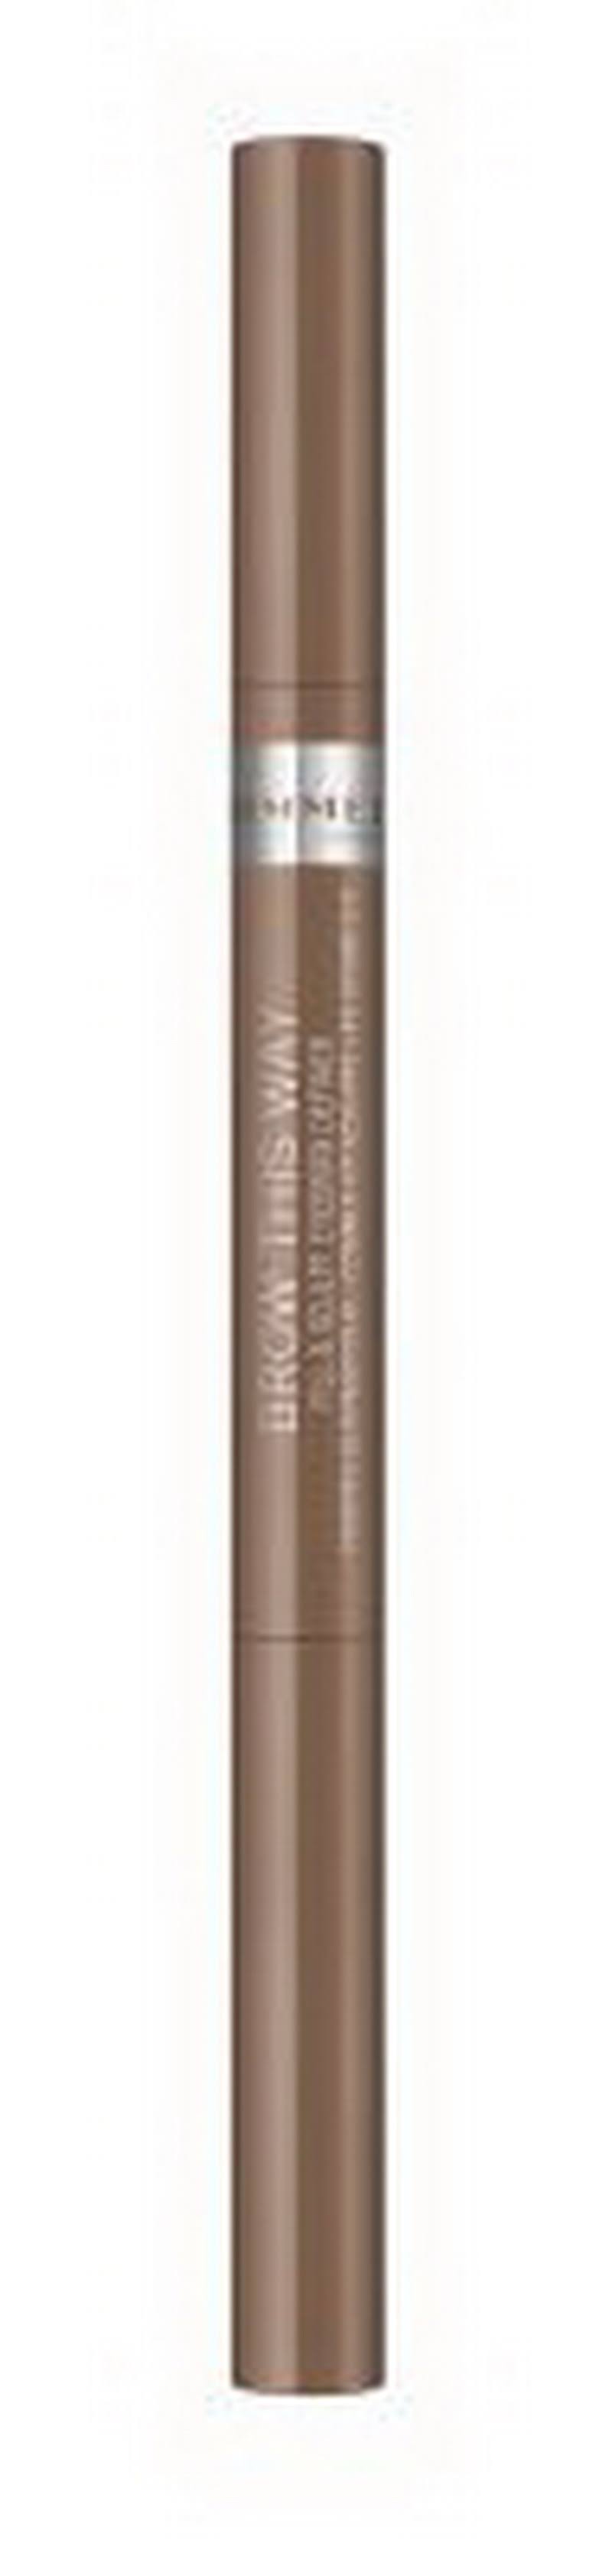 Rimmel Brow This Way Fill and Sculpt Eyebrow Definer - #001 Blonde